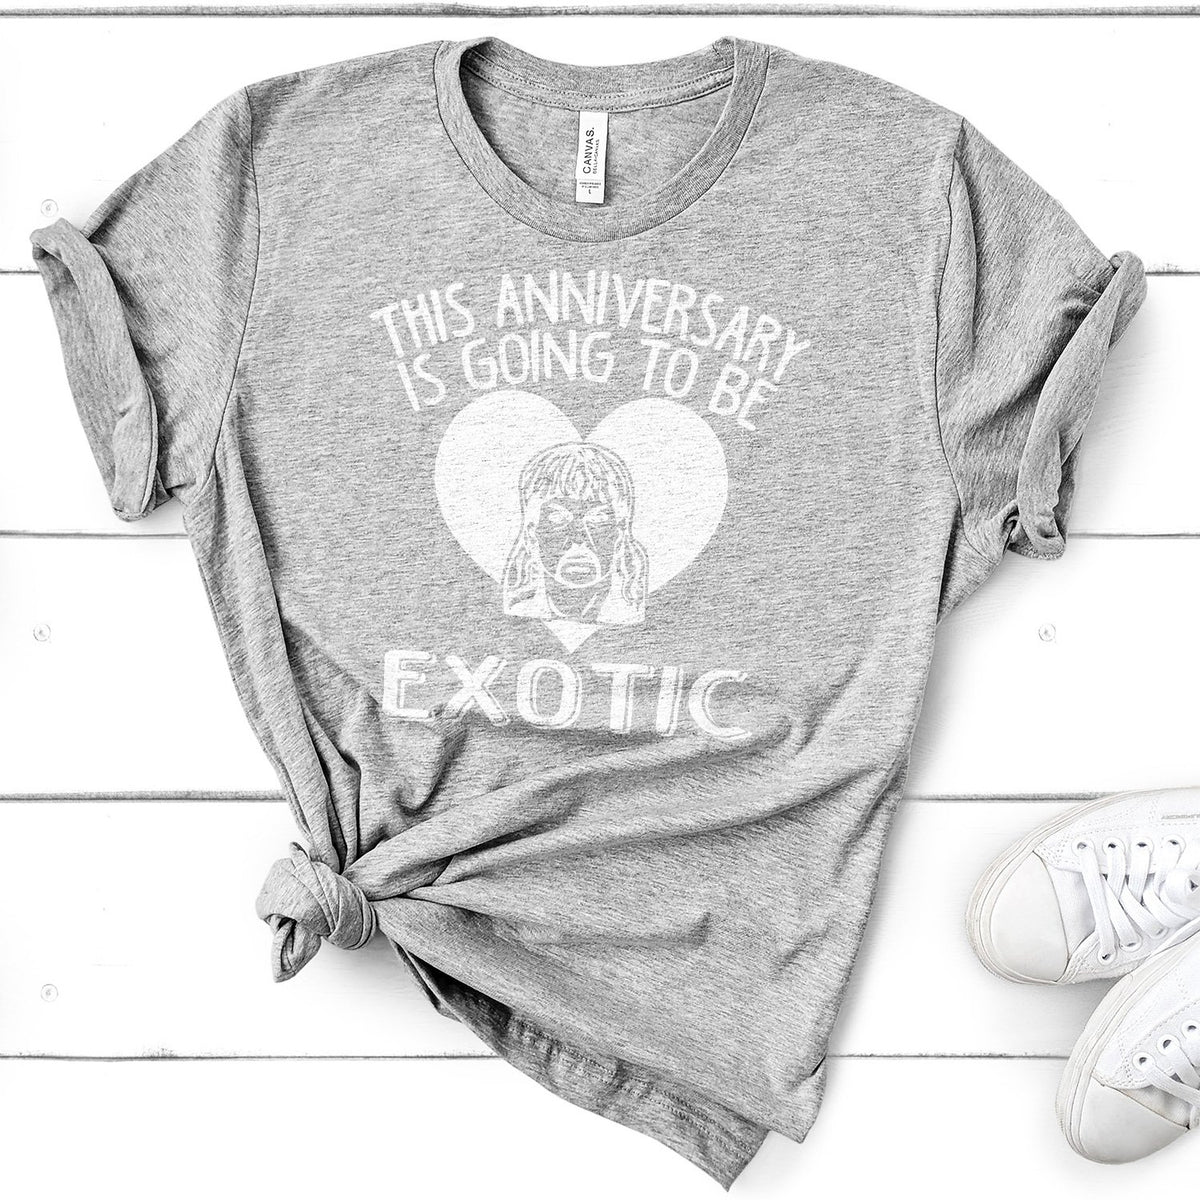 This Anniversary is Going To Be Exotic - Short Sleeve Tee Shirt